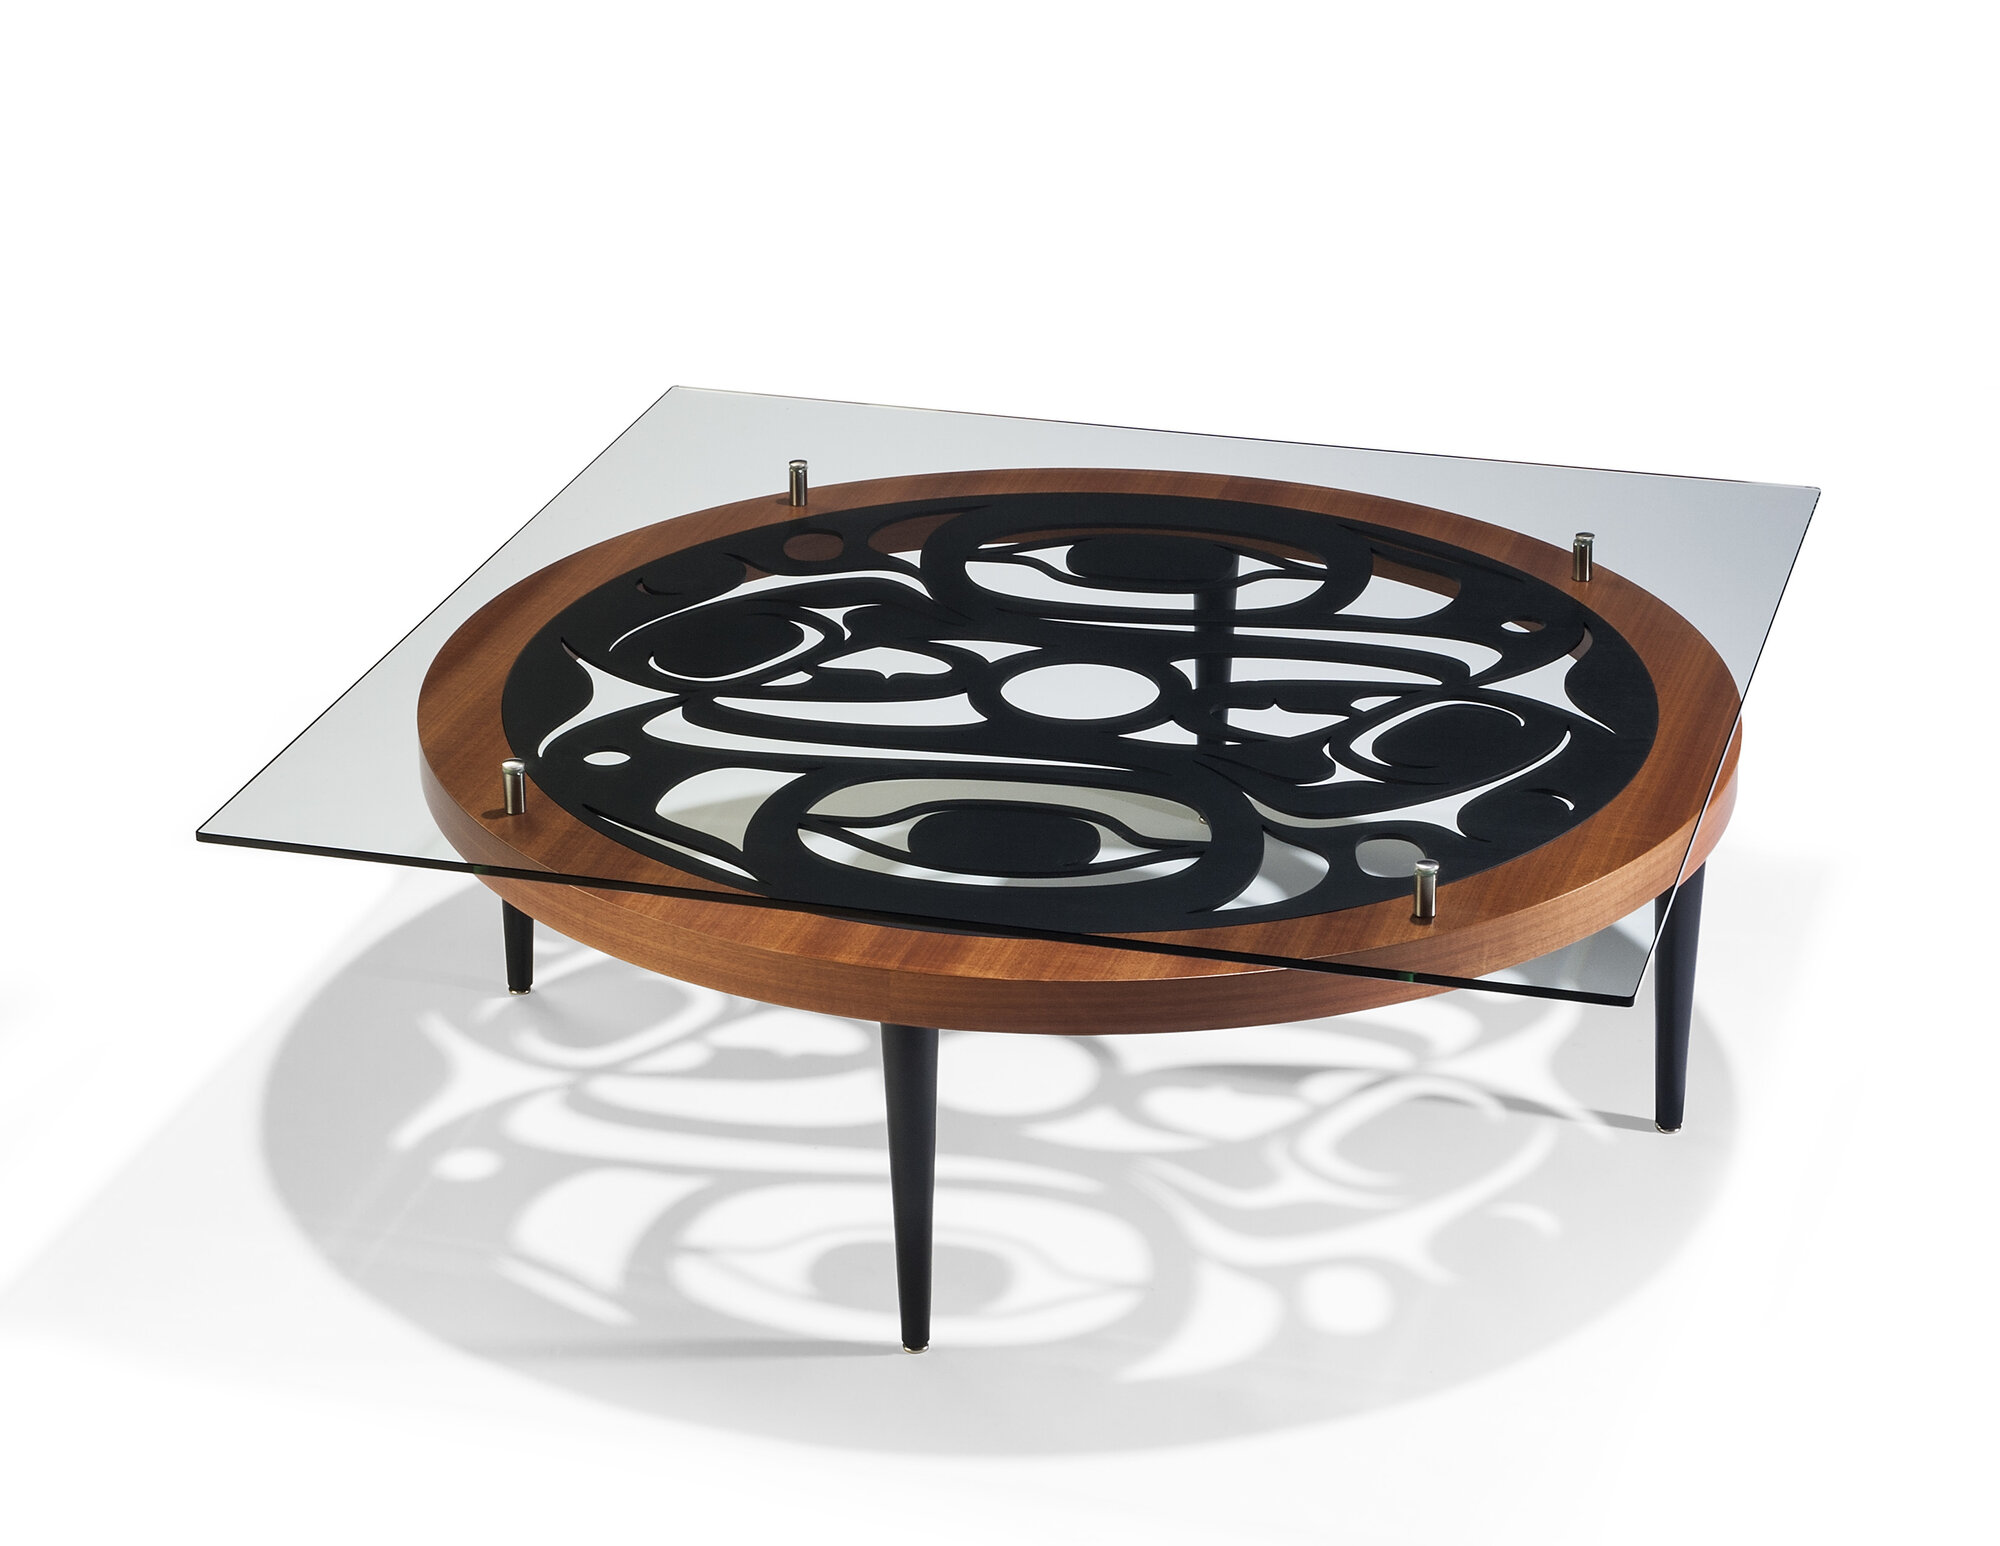 Spindle Whorl Table >Sabina Hill with Mark Preston